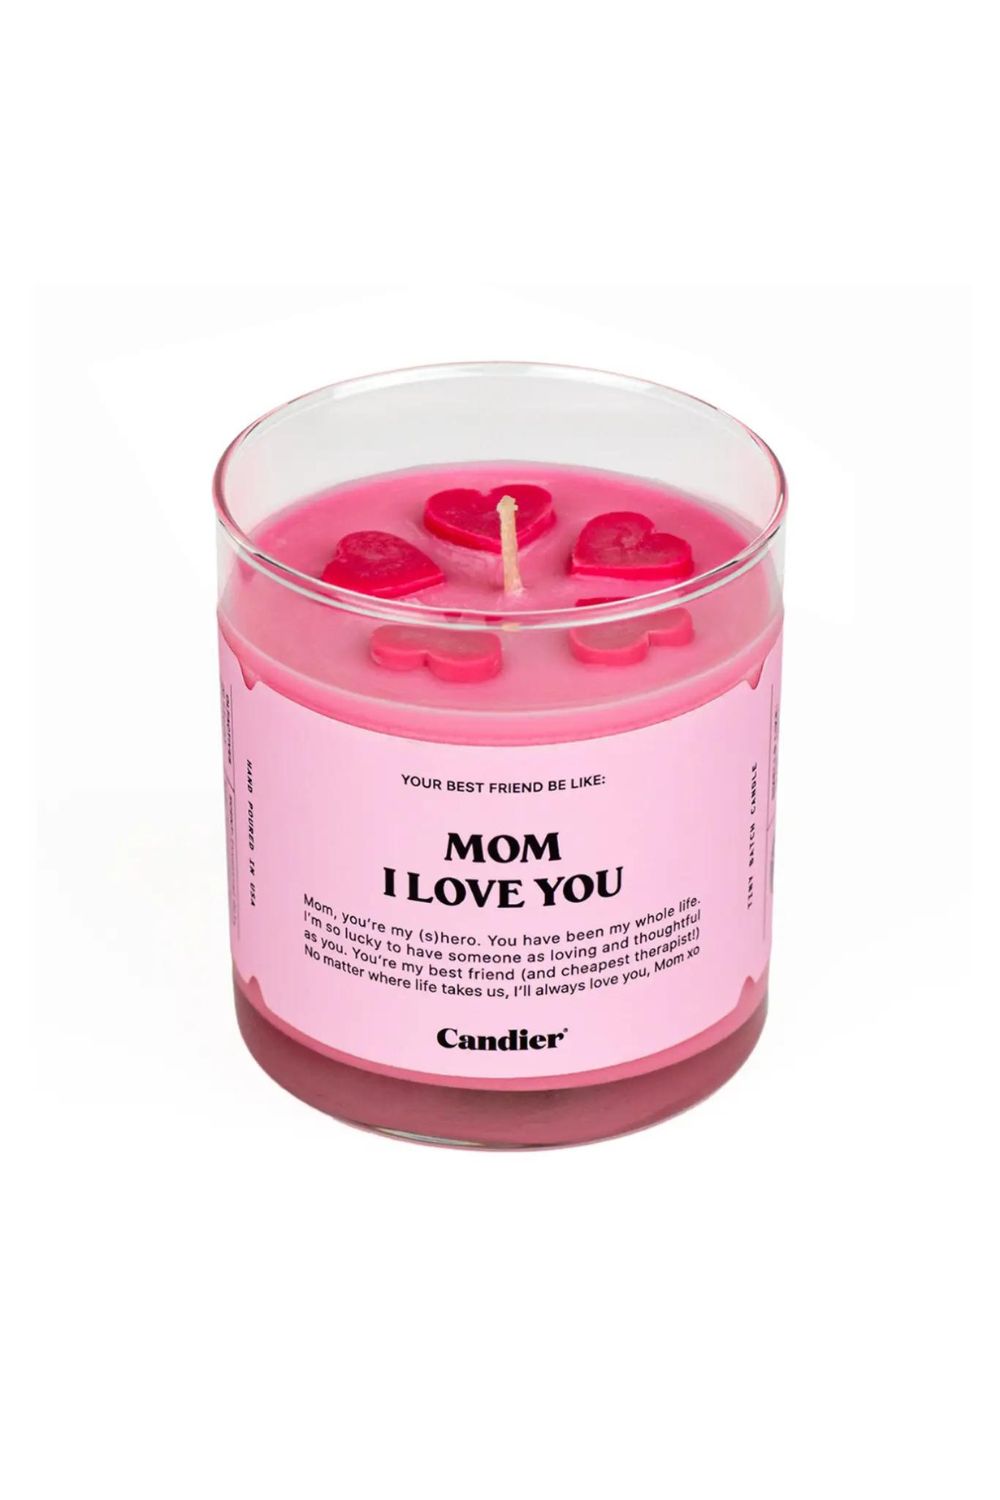 LOVE YOU MOM, CANDLE